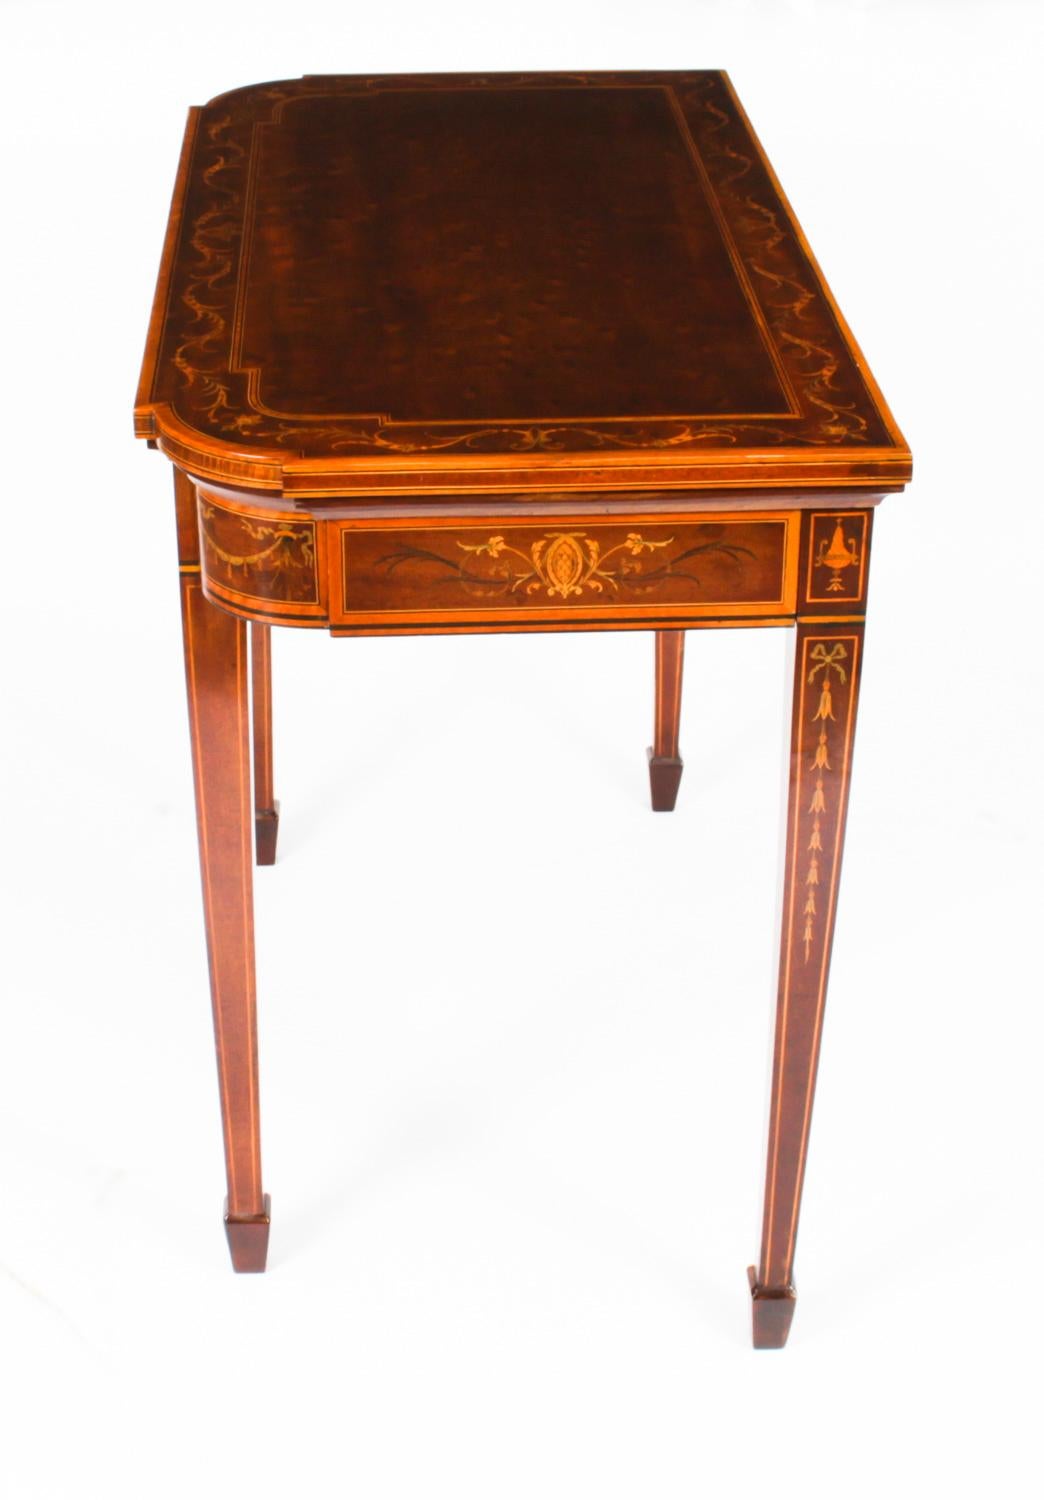 Antique Victorian Mahogany & Inlaid Card Games Table 19th Century For Sale 7